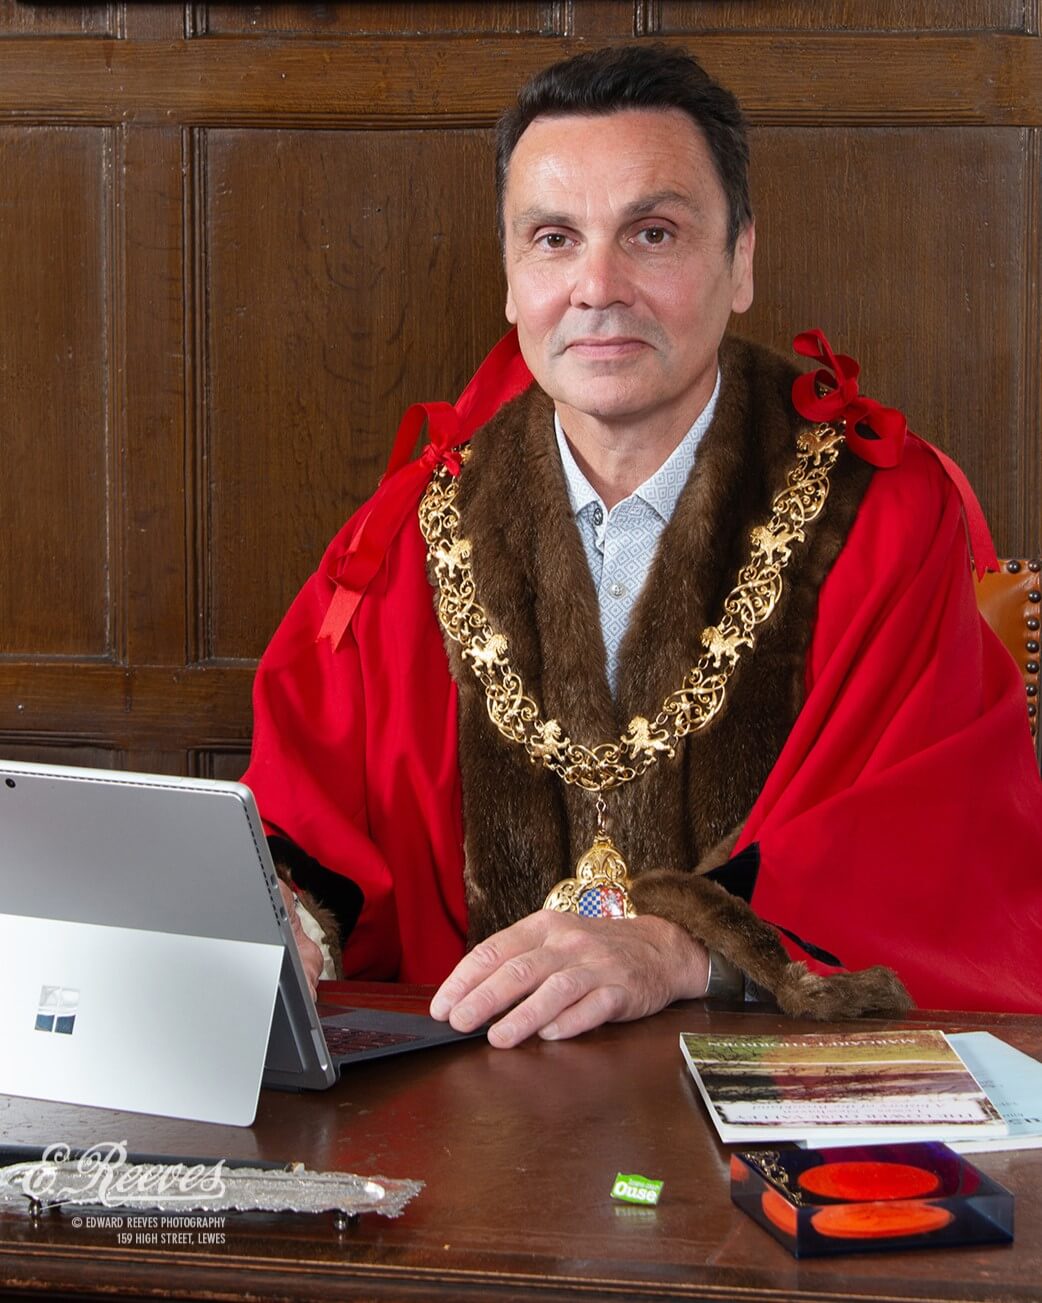 Official Portrait of Cllr Matt Bird, Mayor of Lewes for the year 2023-2024